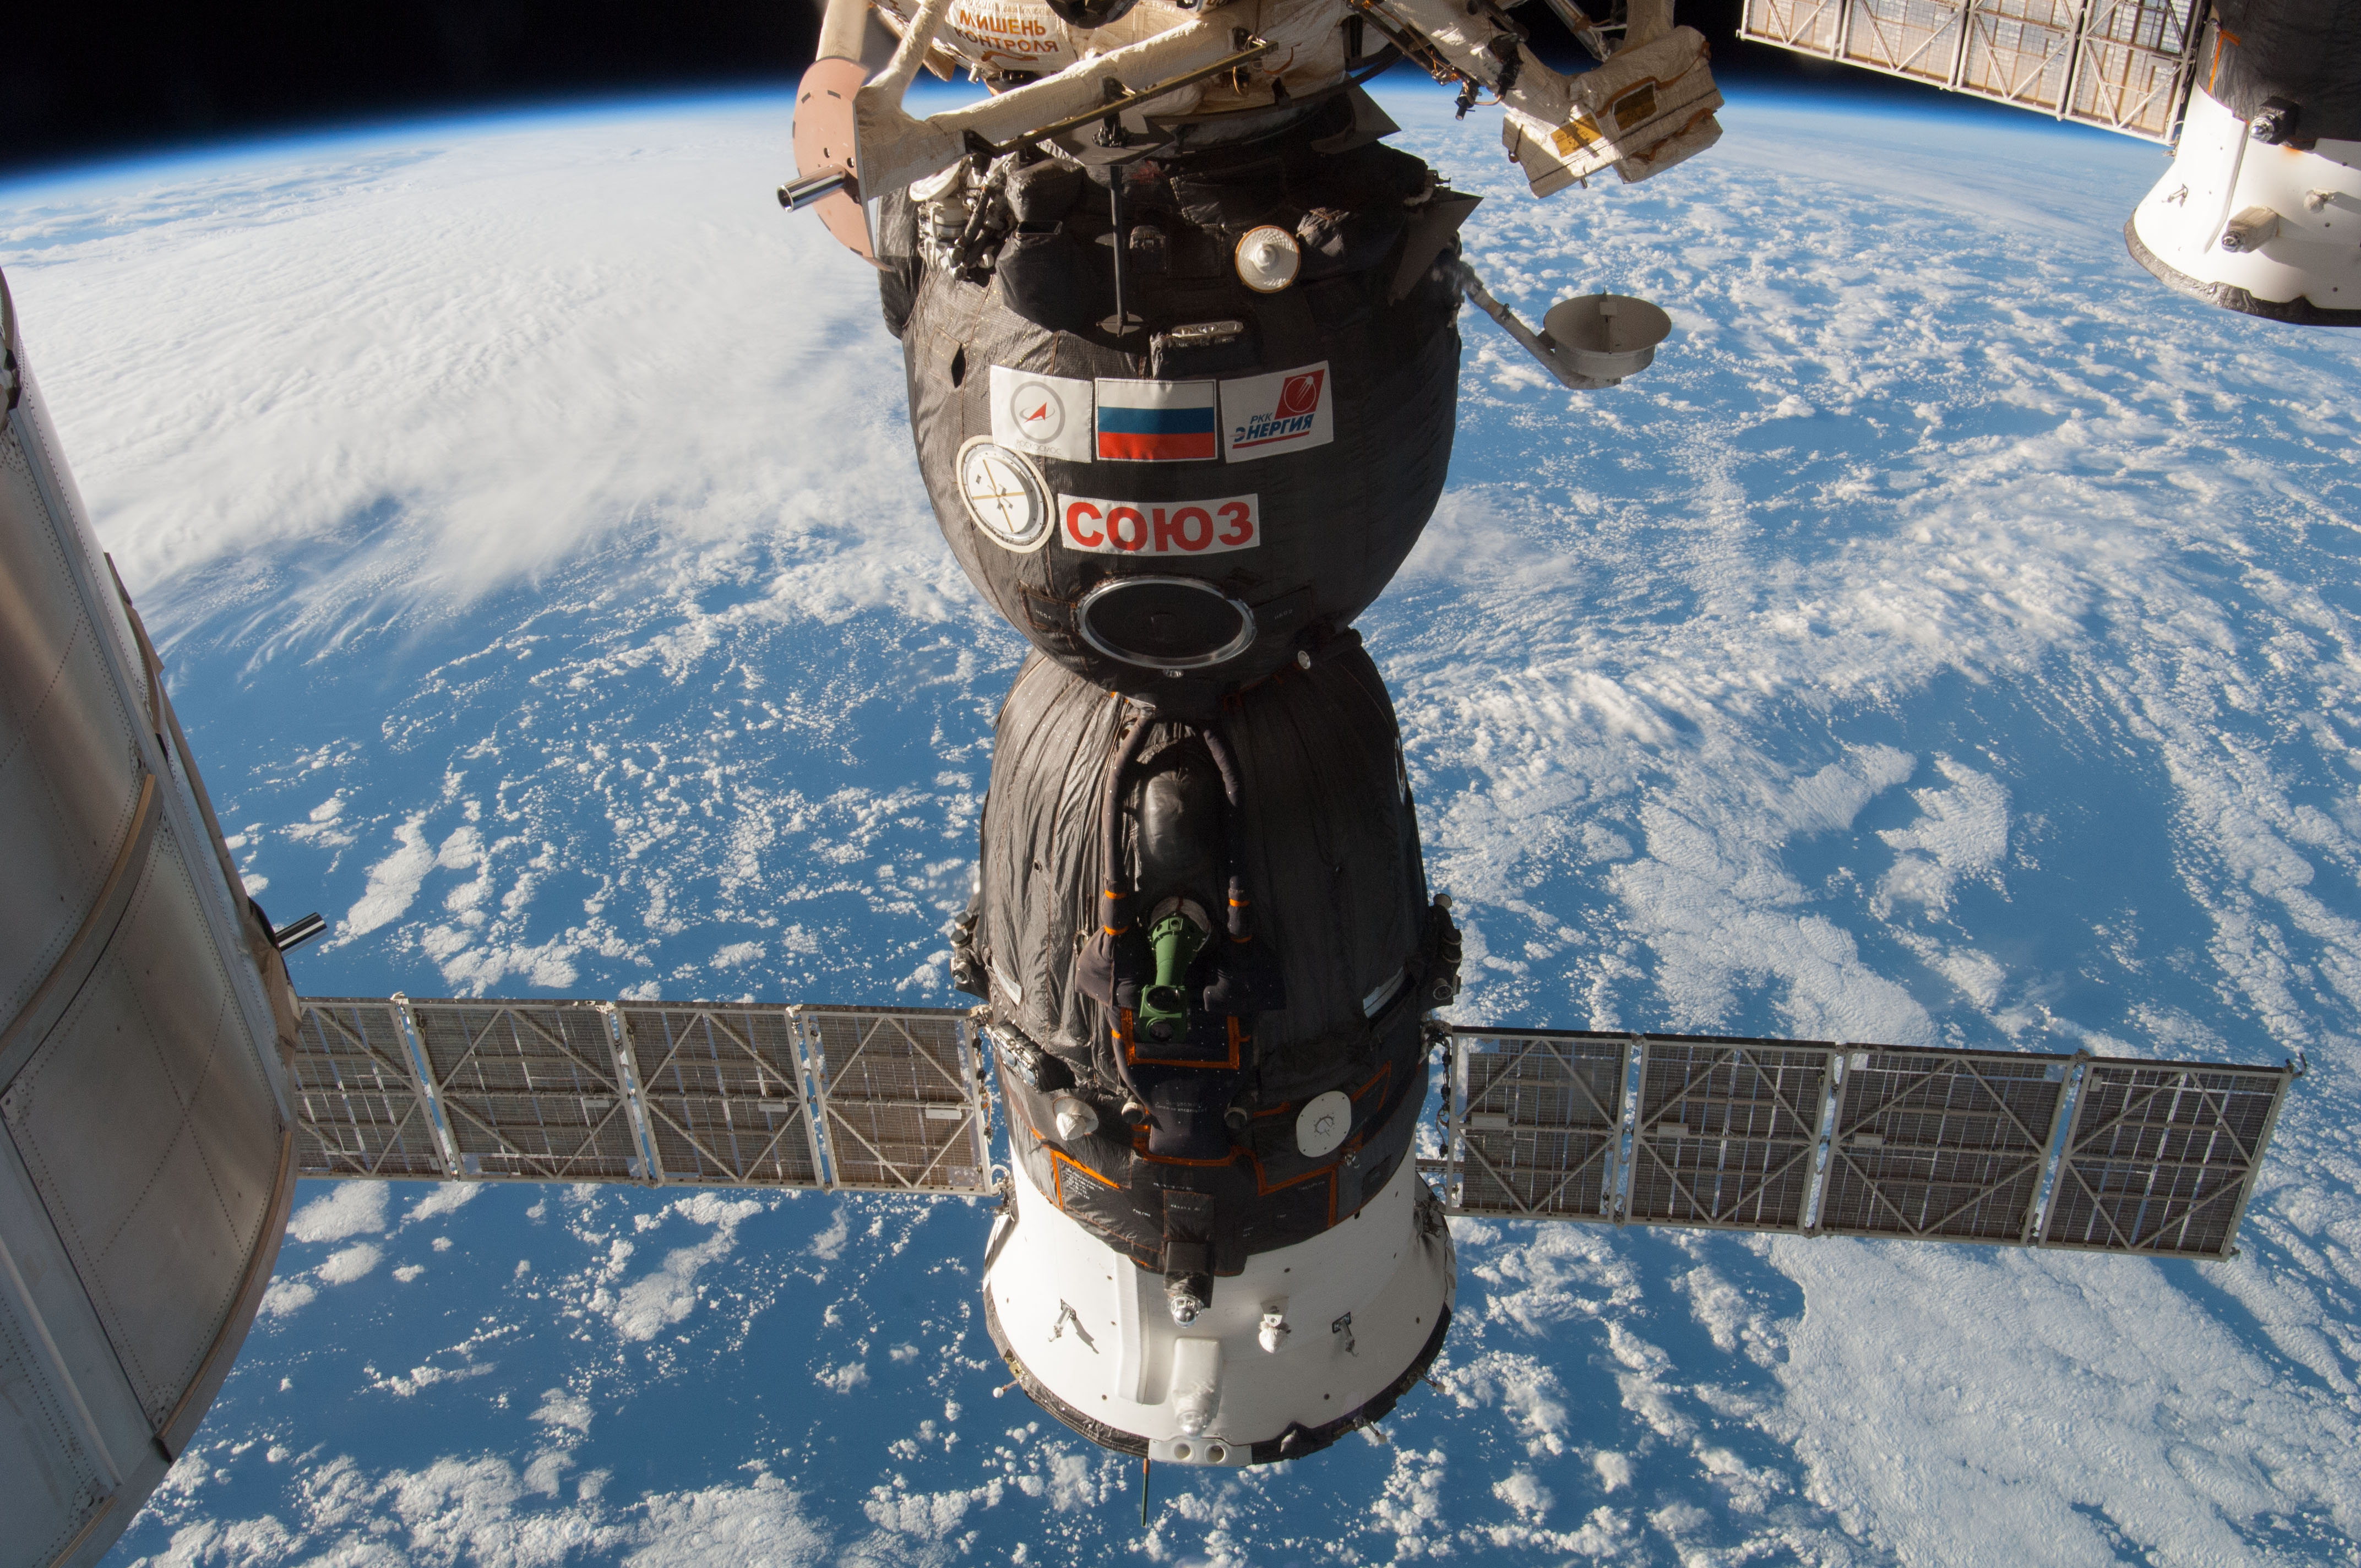 UPDATE 1-Astronauts excited for first manned Soyuz mission since October accident